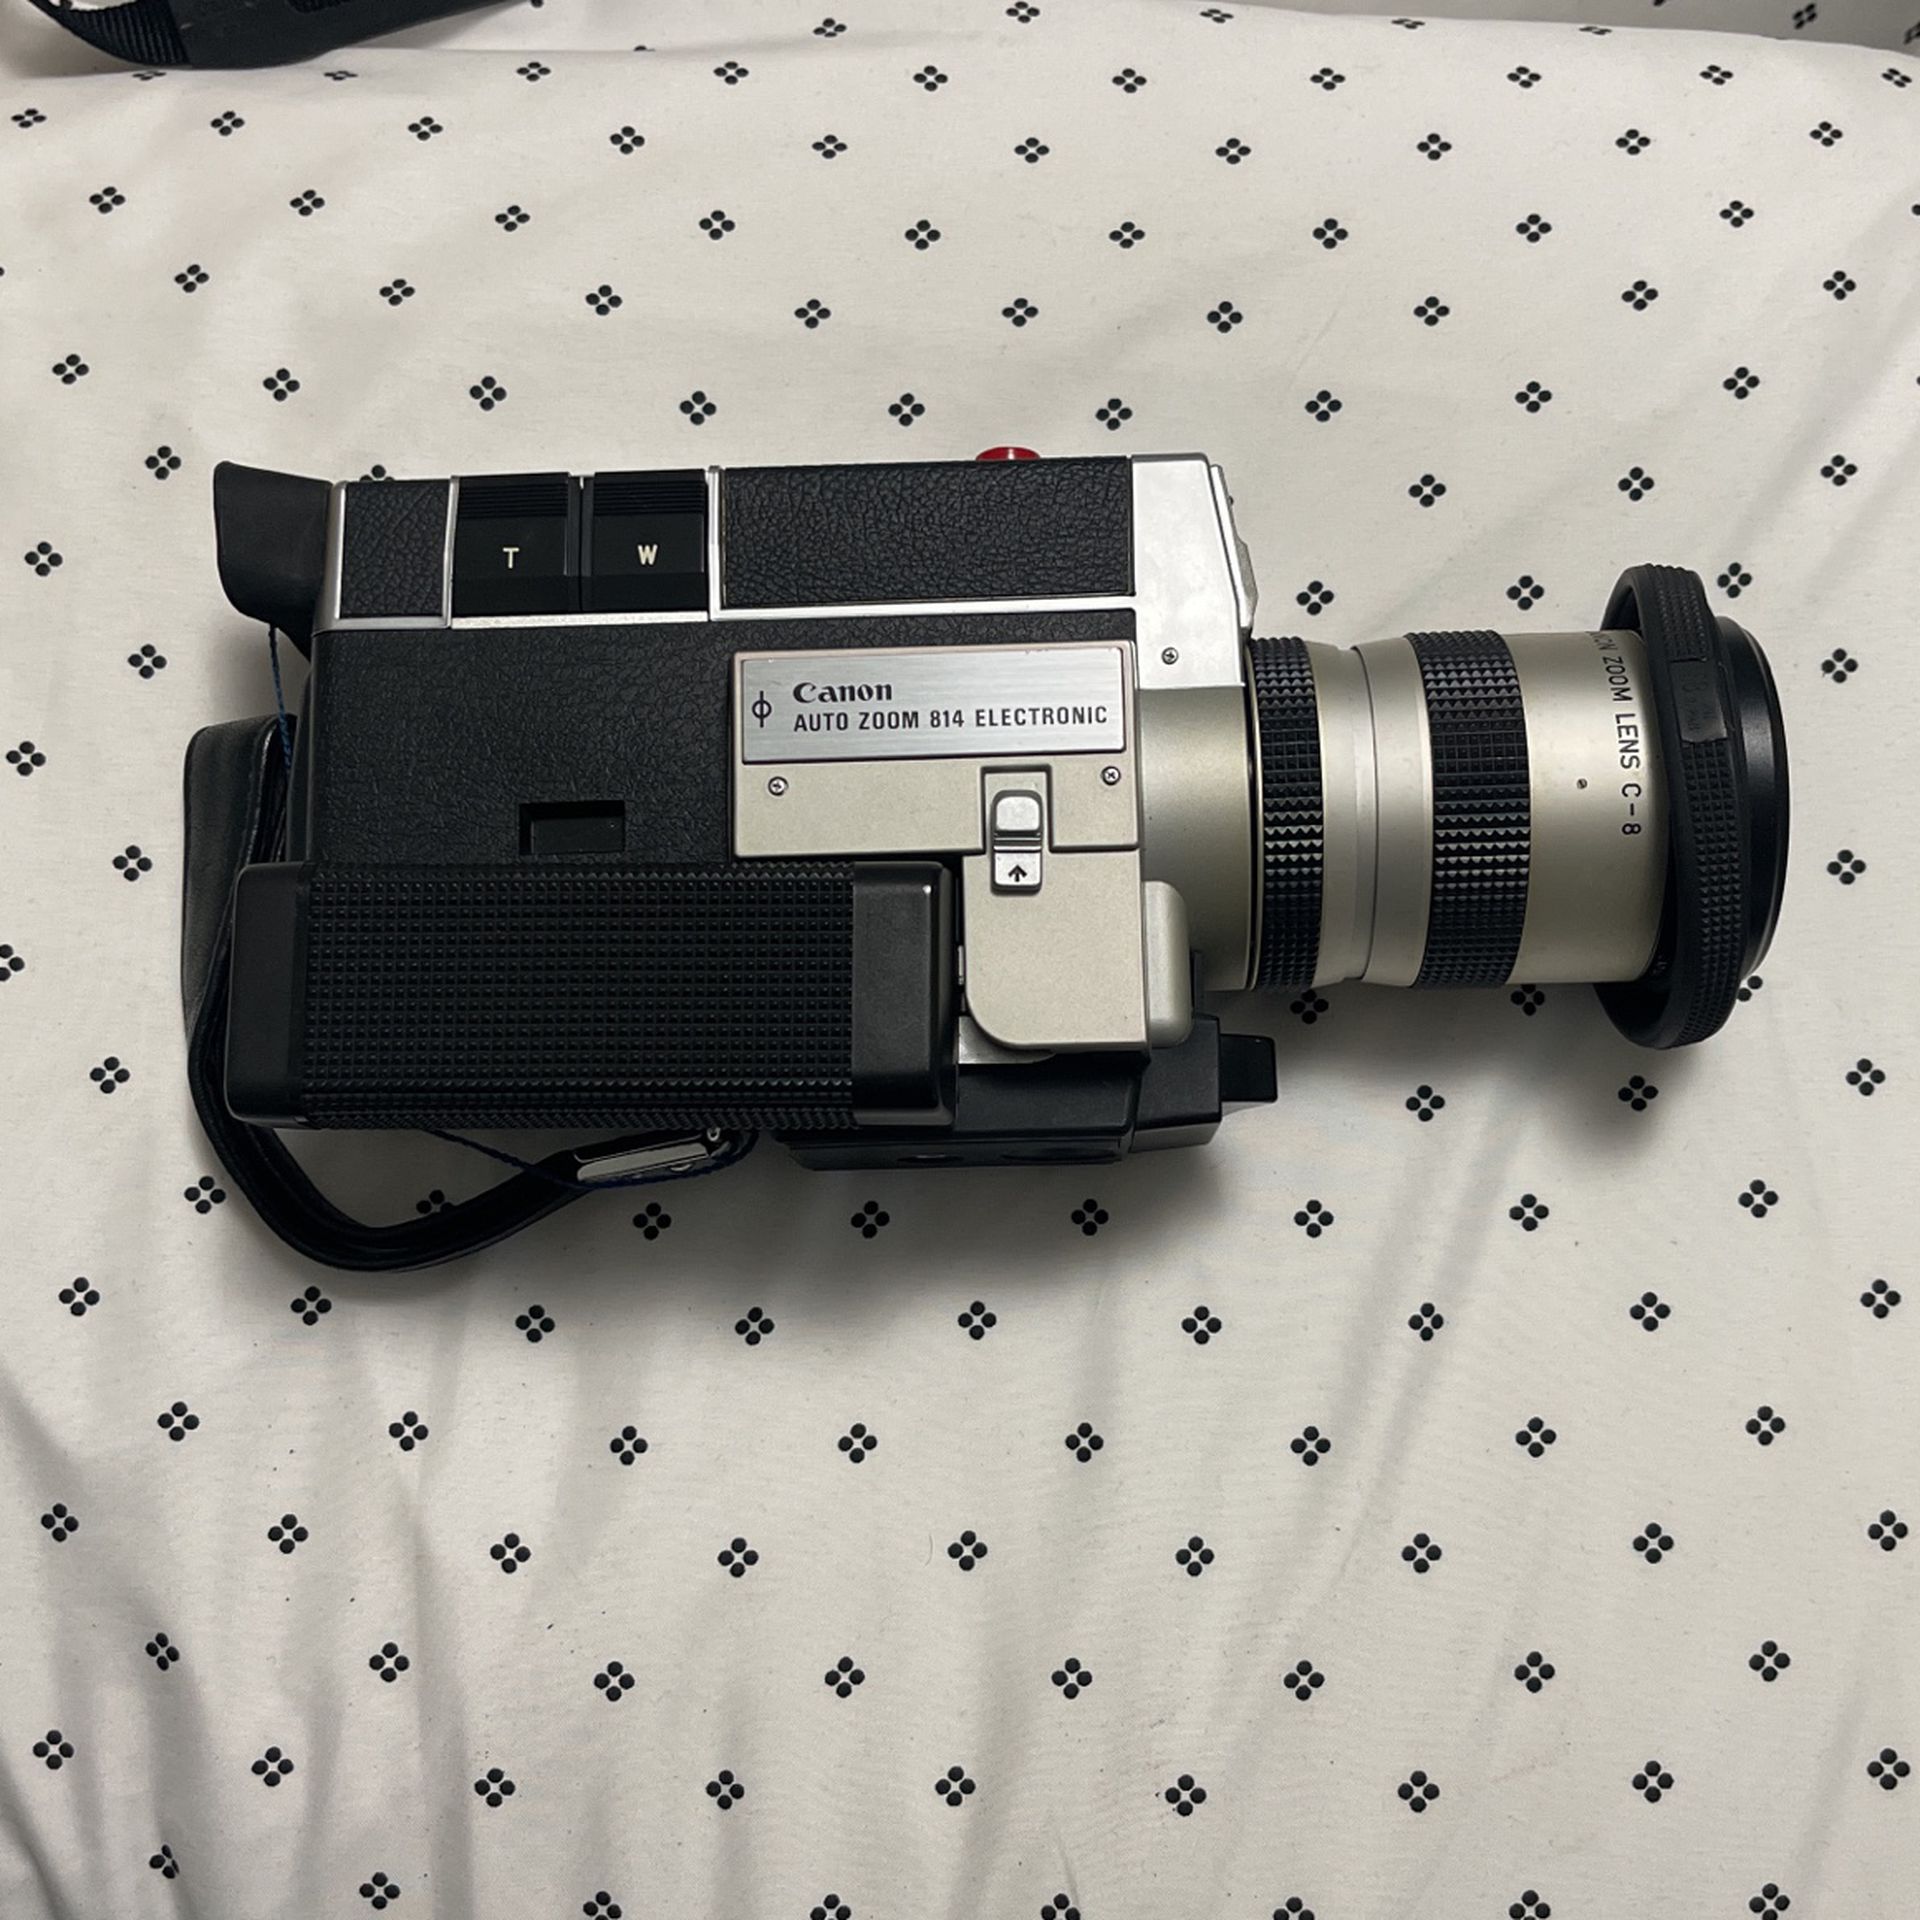 Canon Auto Zoom 814 for Sale in Teaneck, NJ - OfferUp